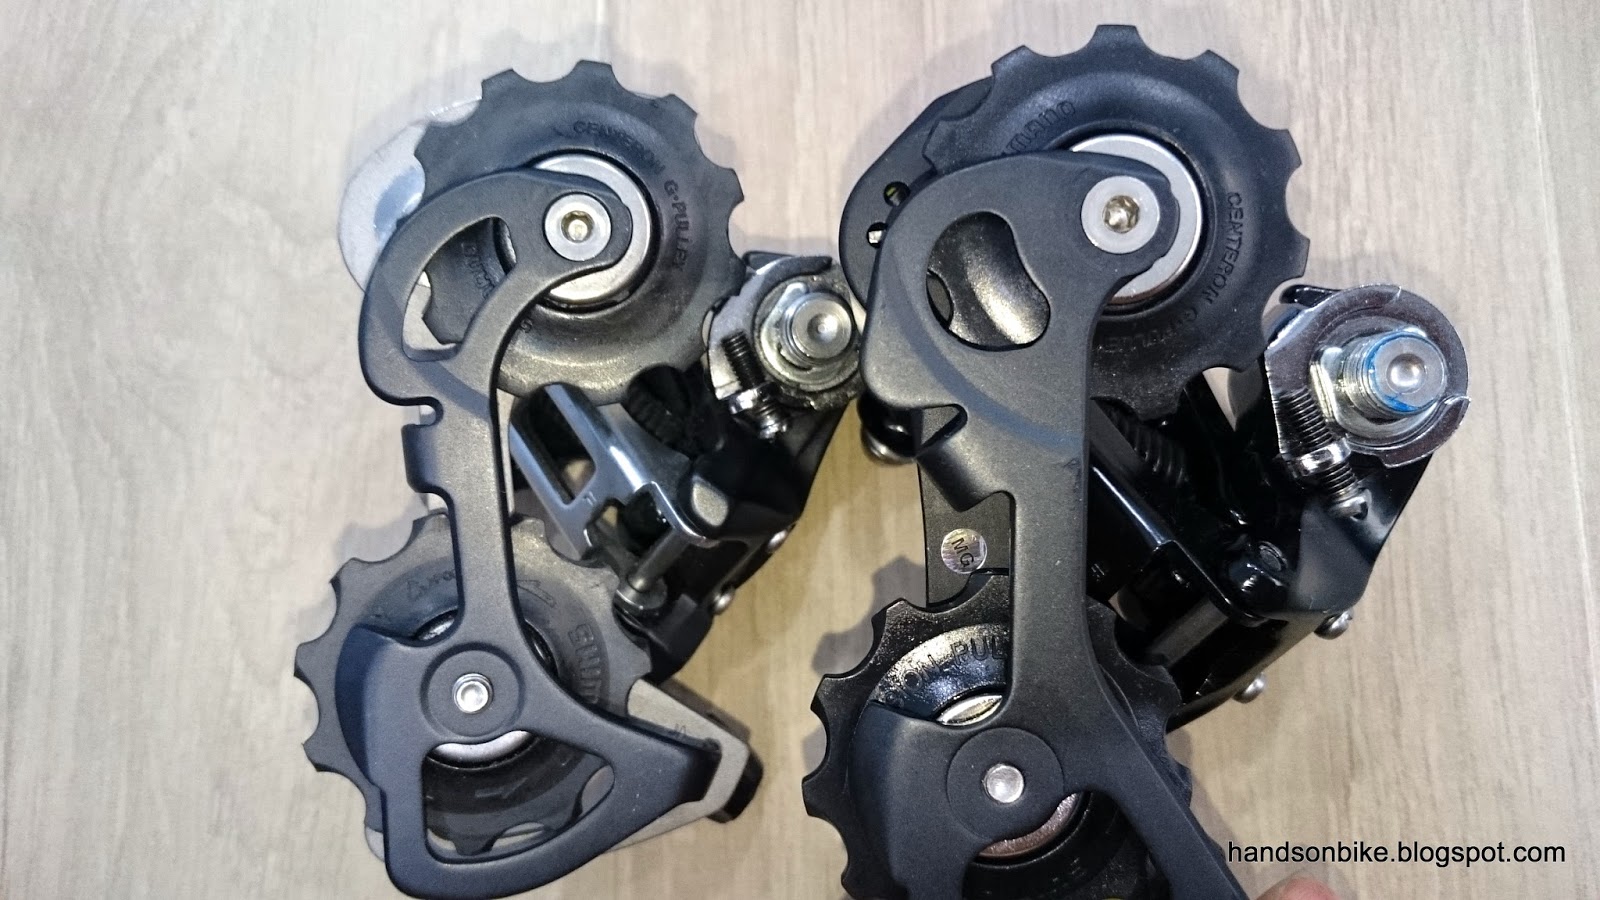 Hands On Bike: Shimano 105 5800 vs 5700: Rear Derailleur and Front